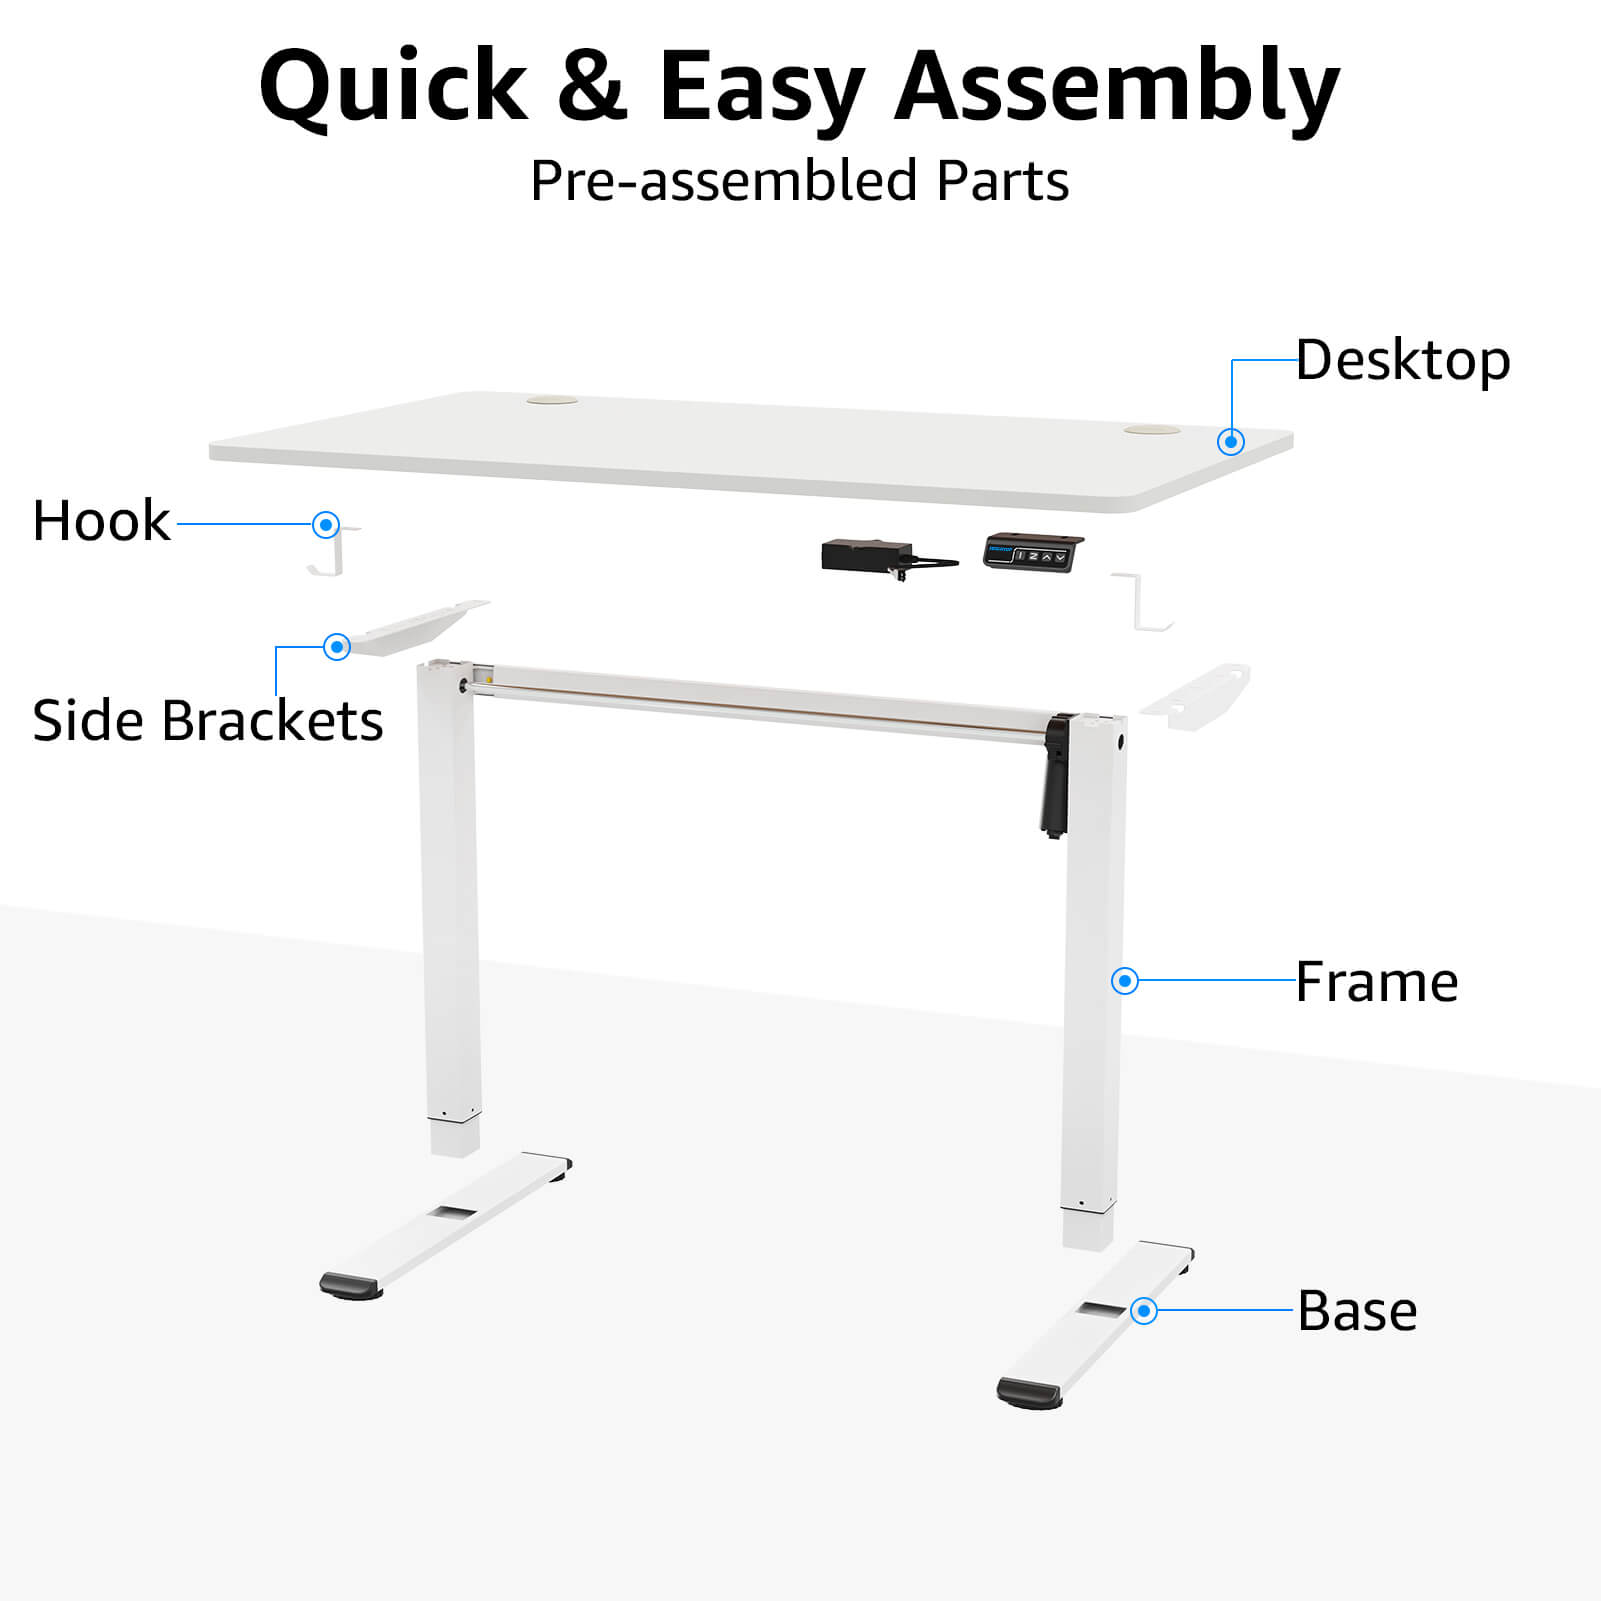 Height Adjustable Electric Standing Desk - White